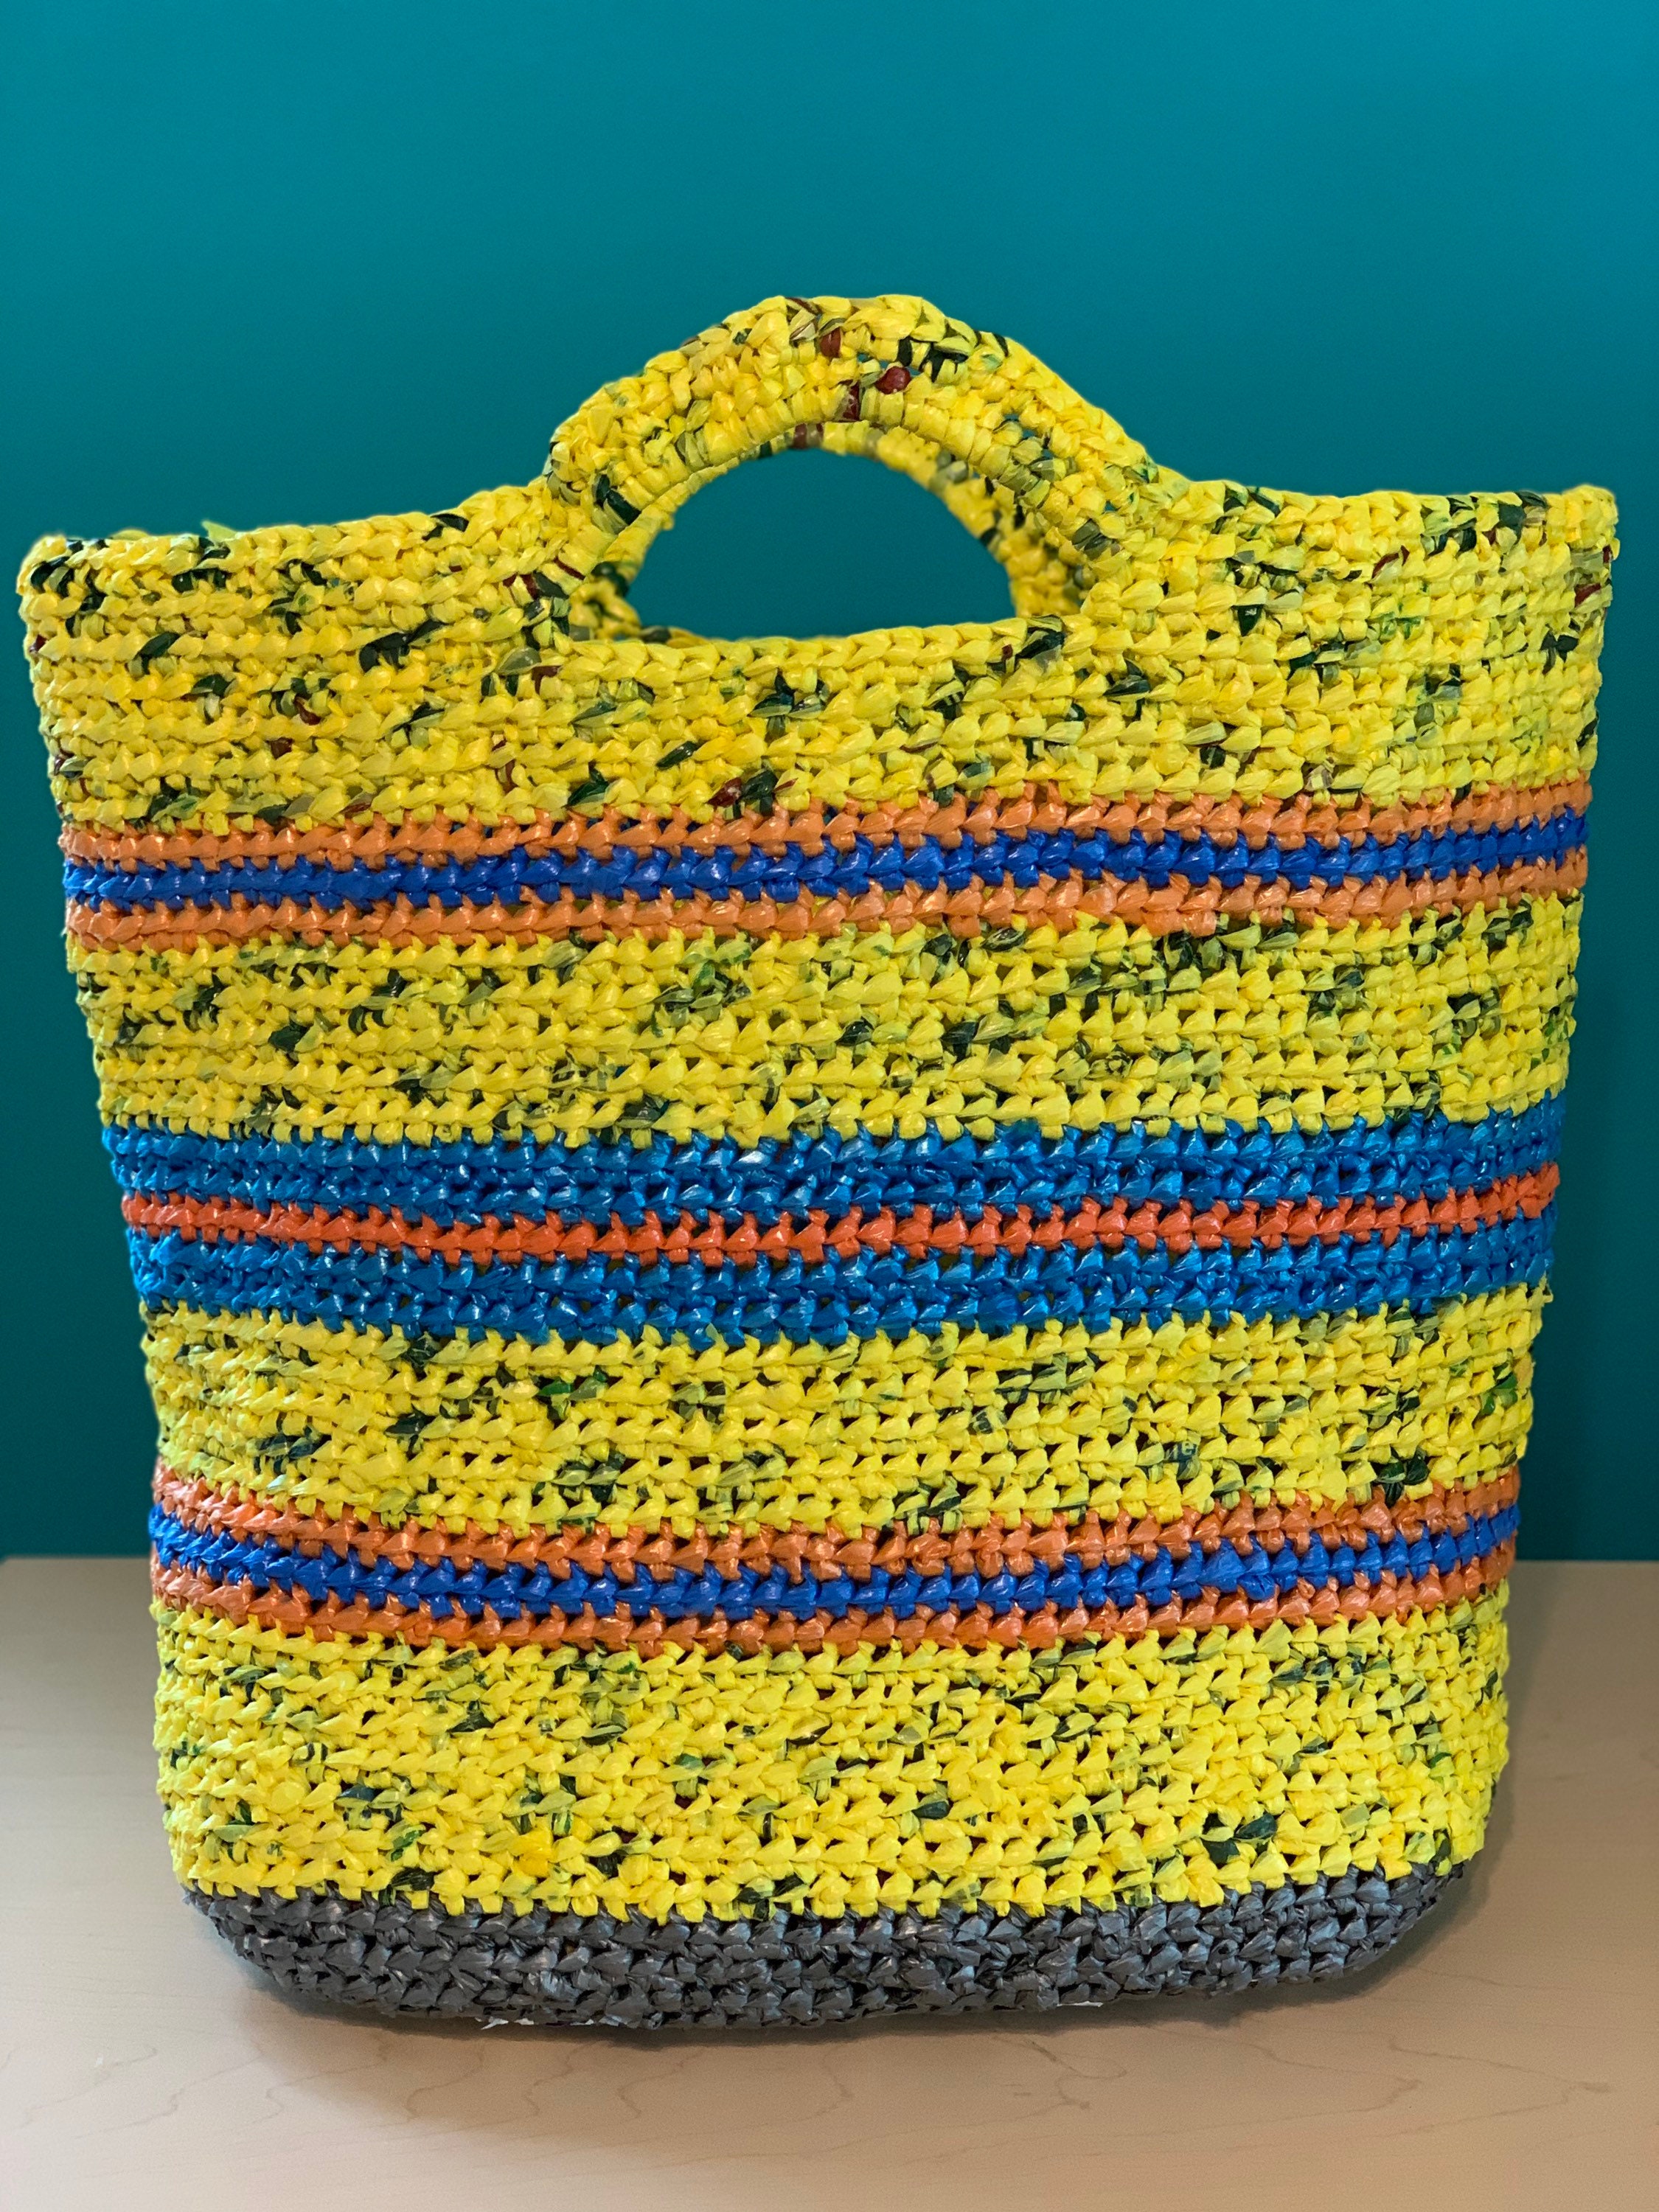 Recycled Plastic Bags Crochet Purse Shoulder Bag Blue Pink Yellow Upcycled  Tote